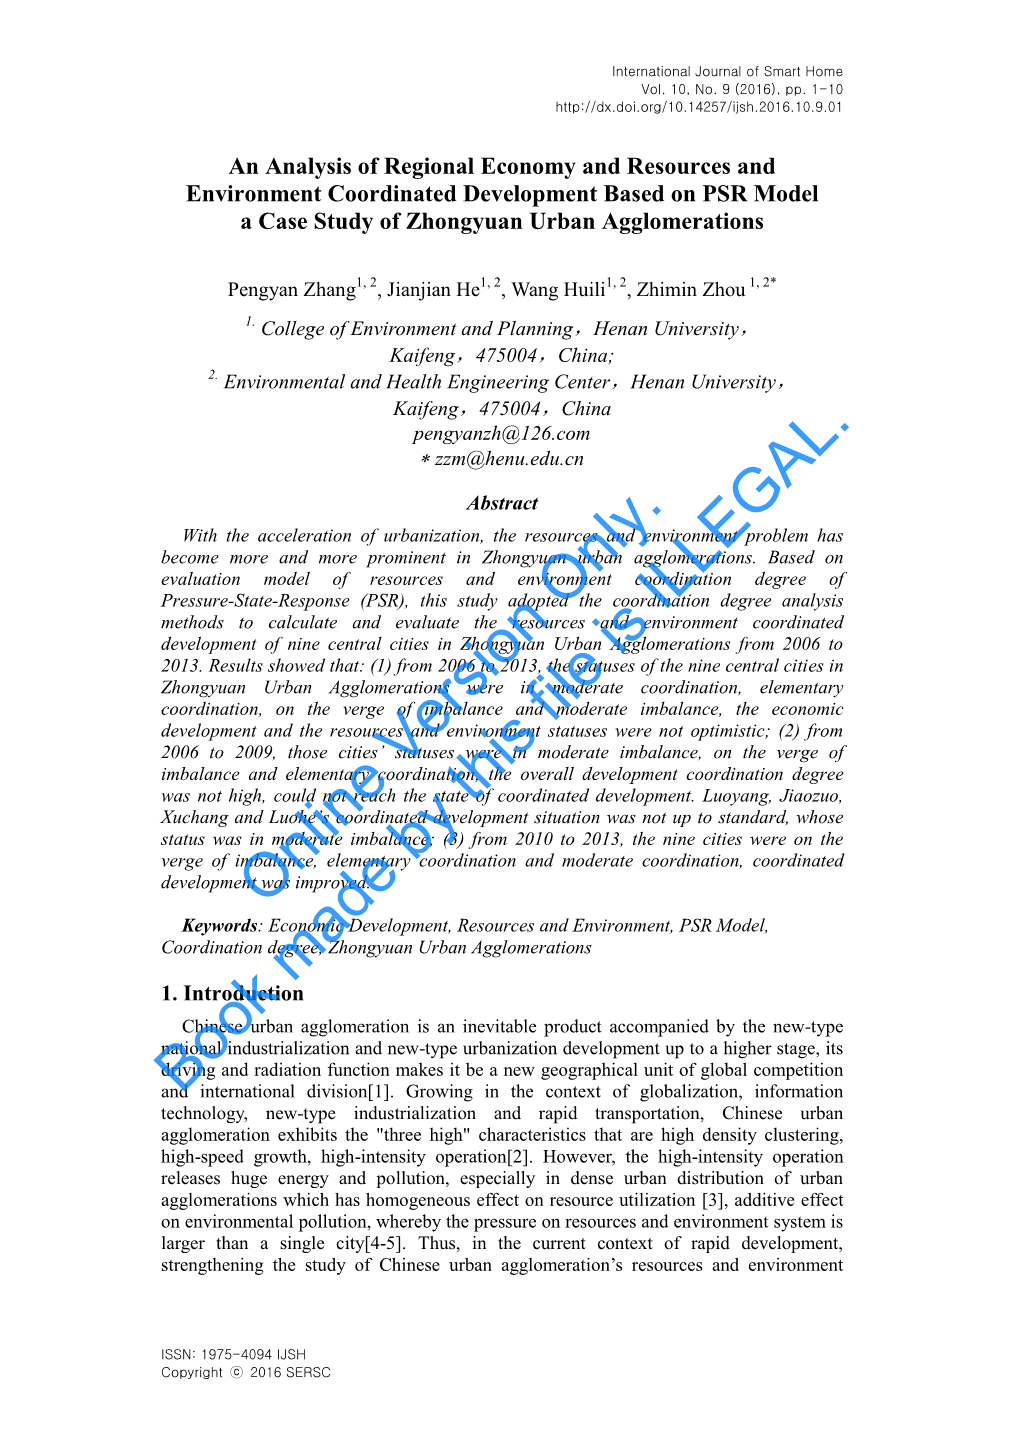 An Analysis of Regional Economy and Resources and Environment Coordinated Development Based on PSR Model a Case Study of Zhongyuan Urban Agglomerations